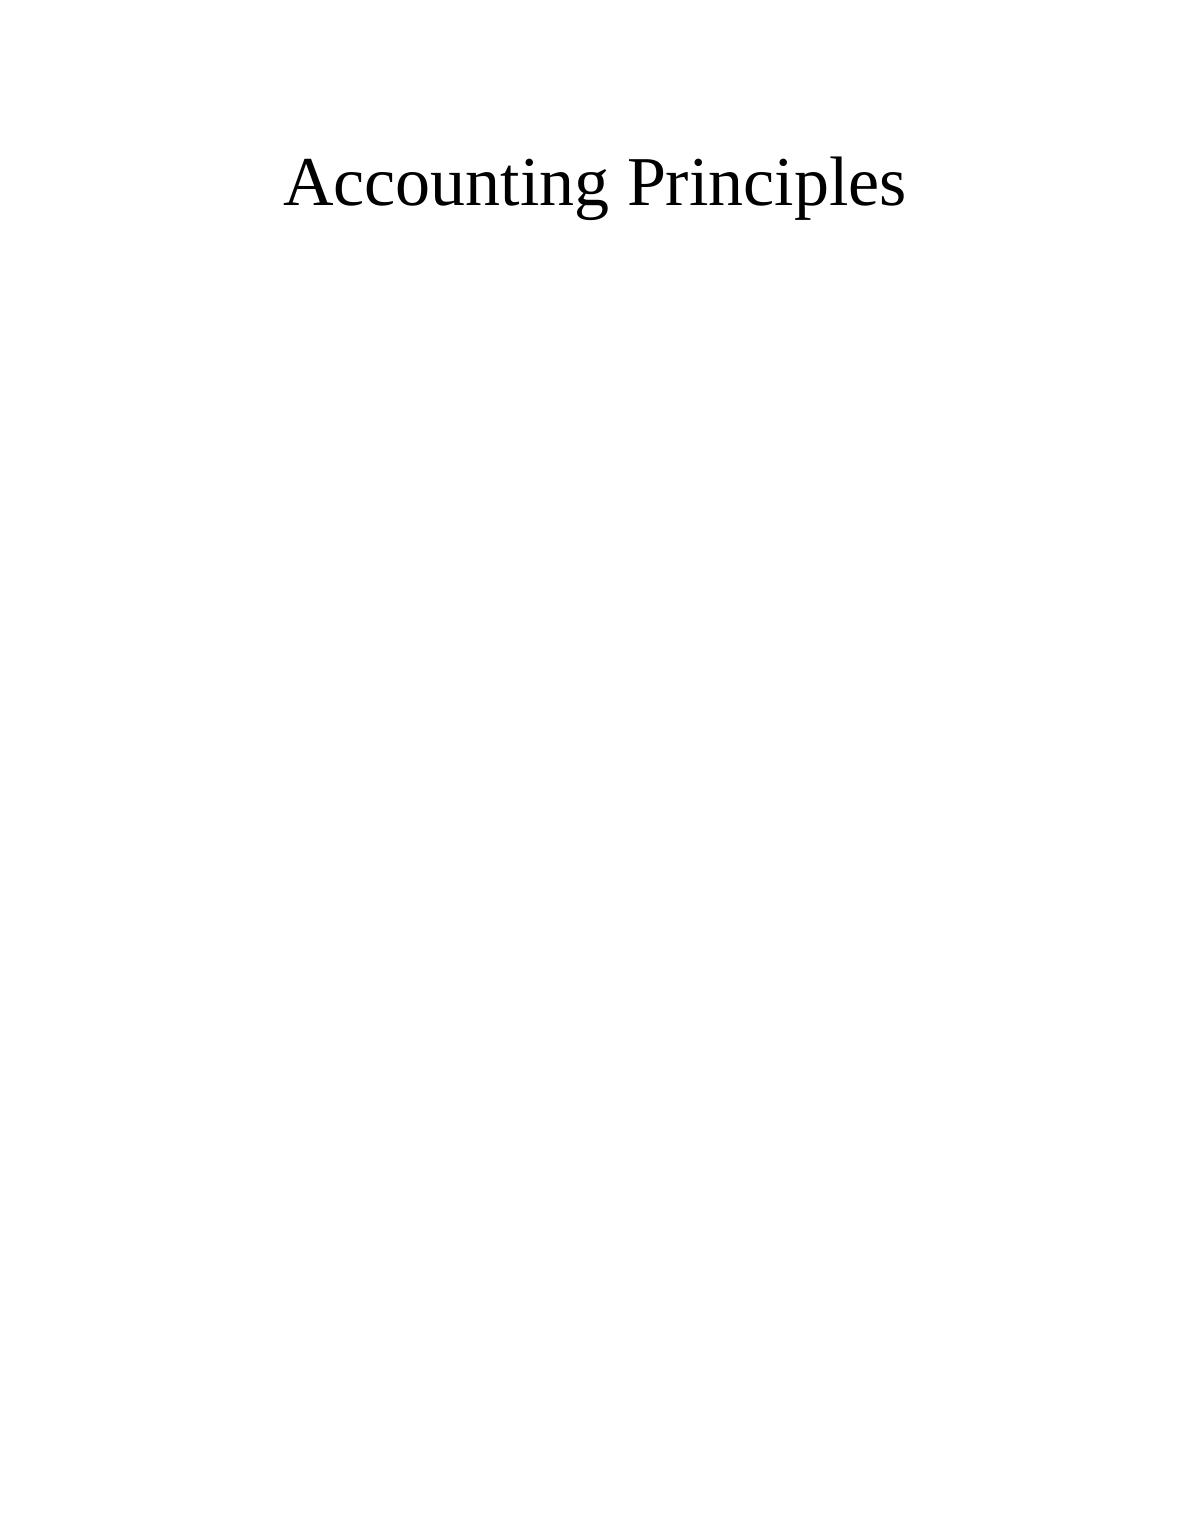 assignment on accounting principles